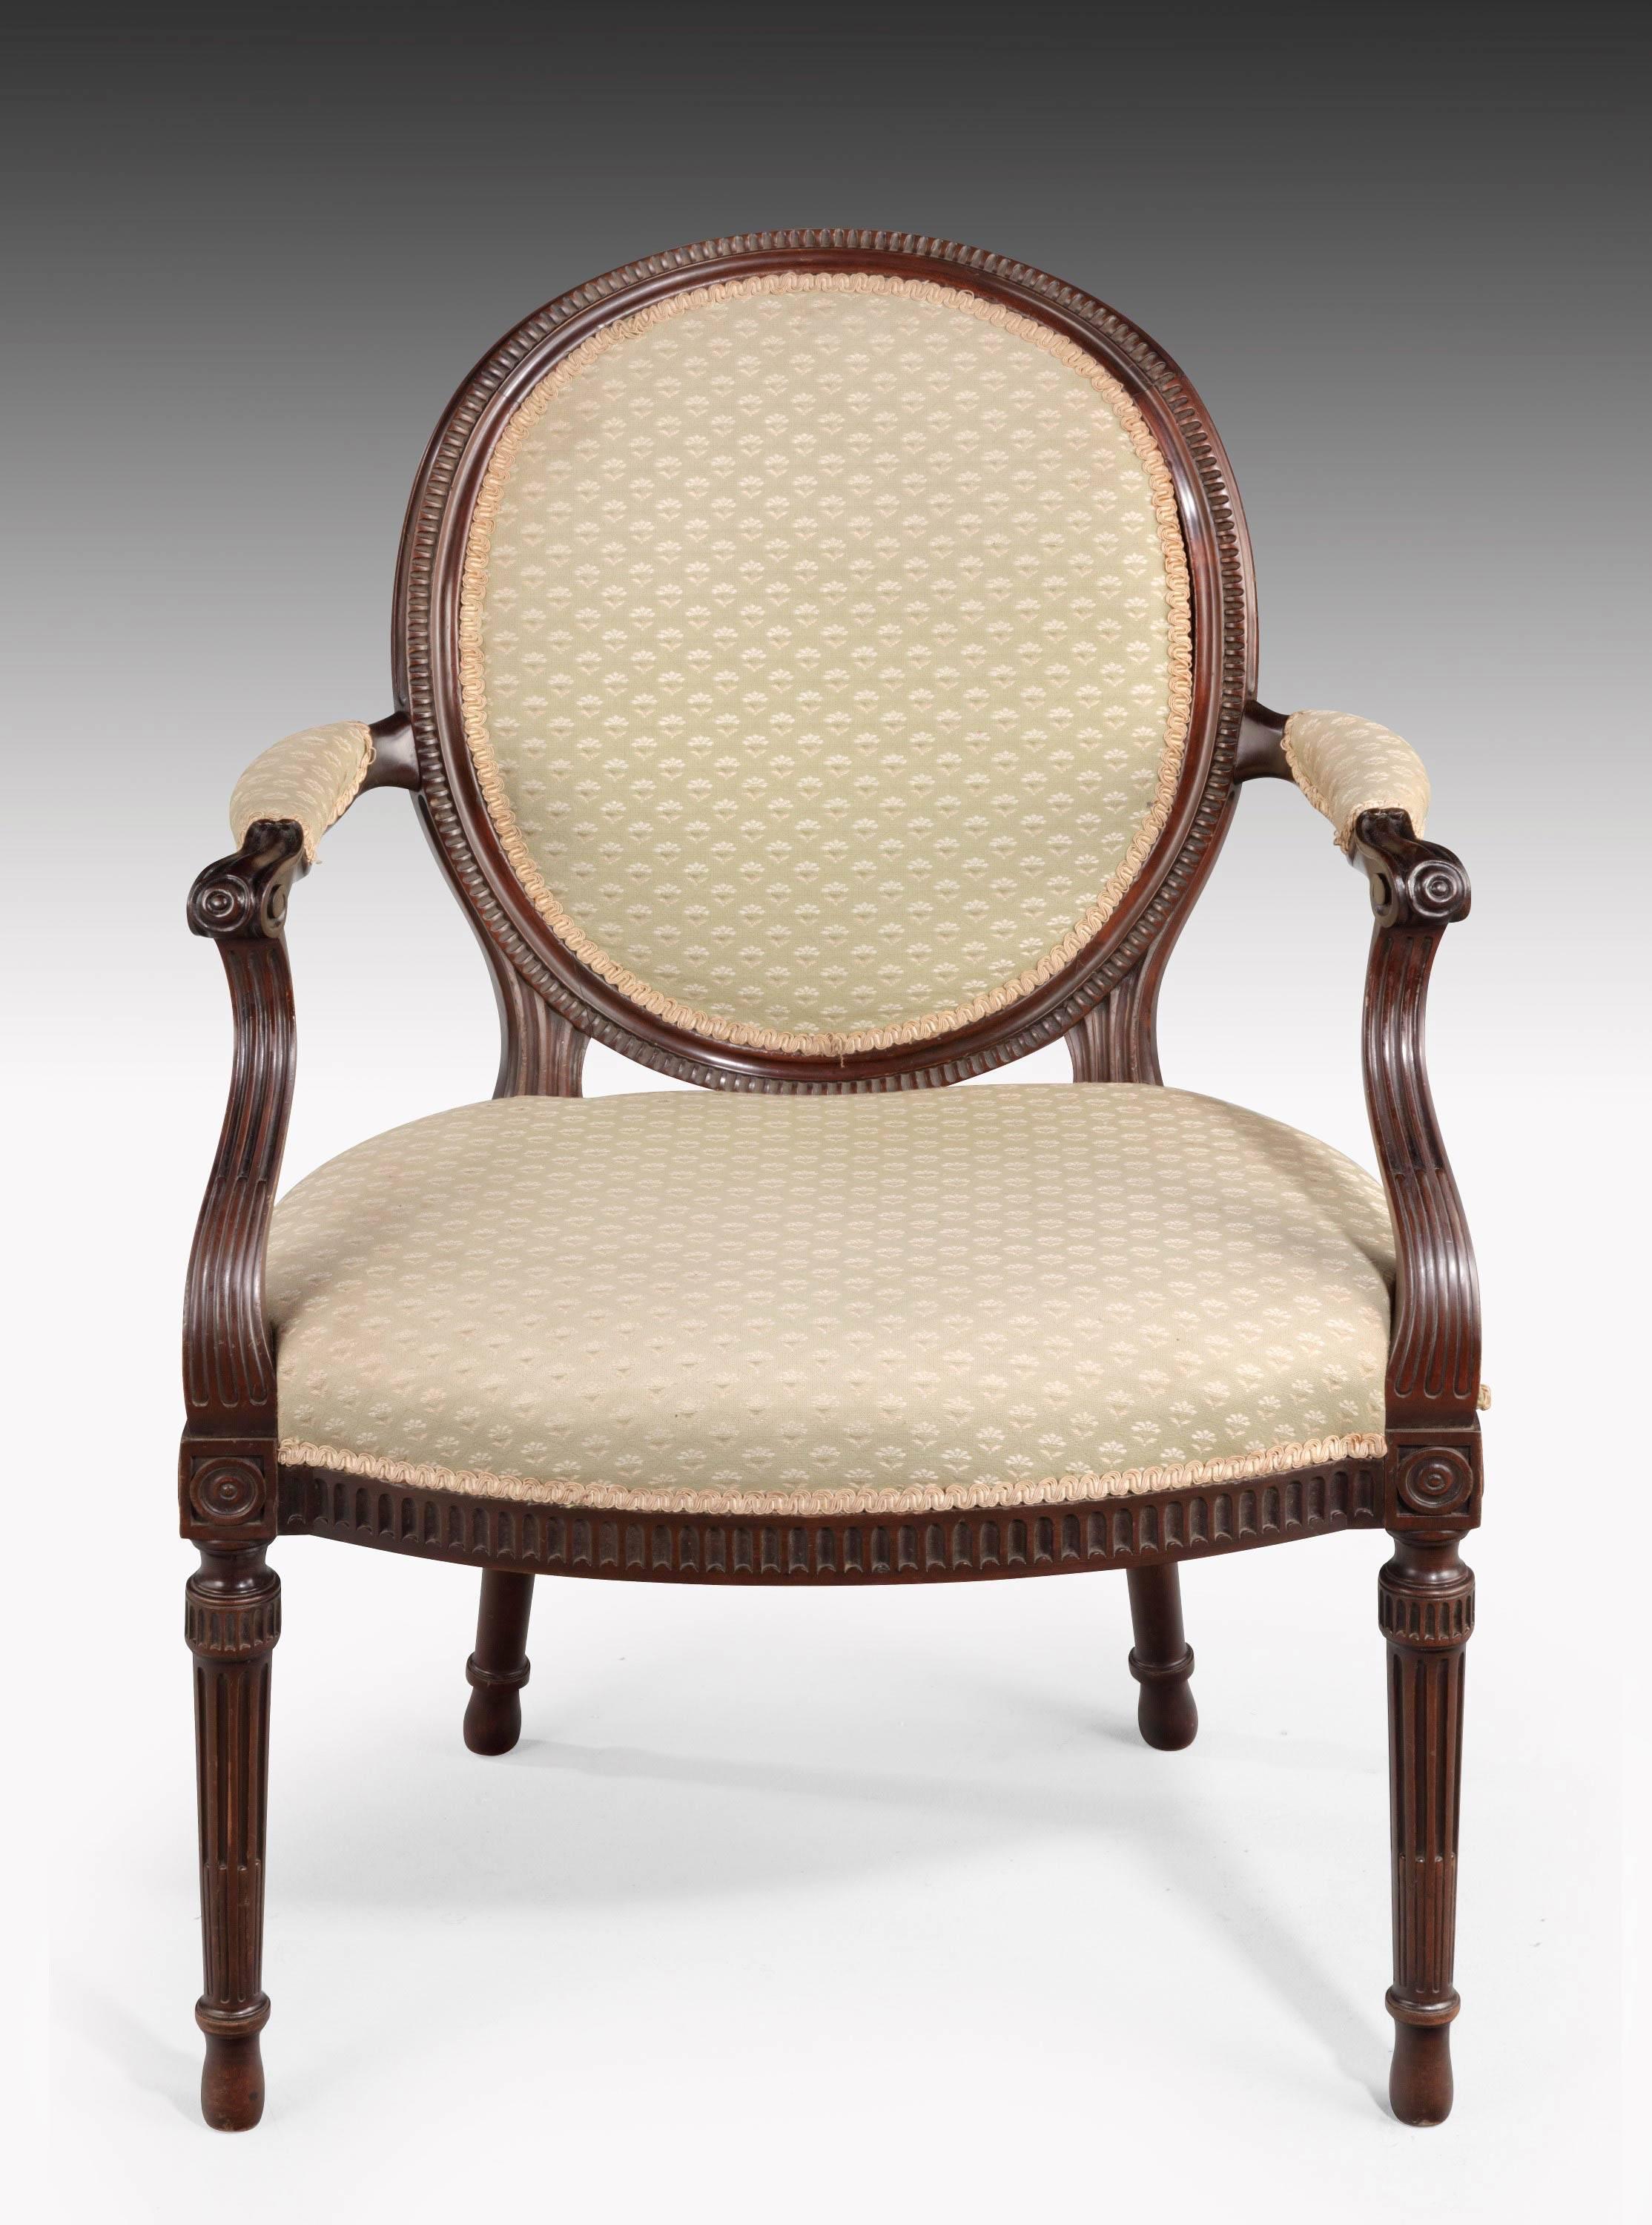 Pair of George III Style Hepplewhite Elbow Chairs with Reeded Incised Decoration In Excellent Condition In Peterborough, Northamptonshire